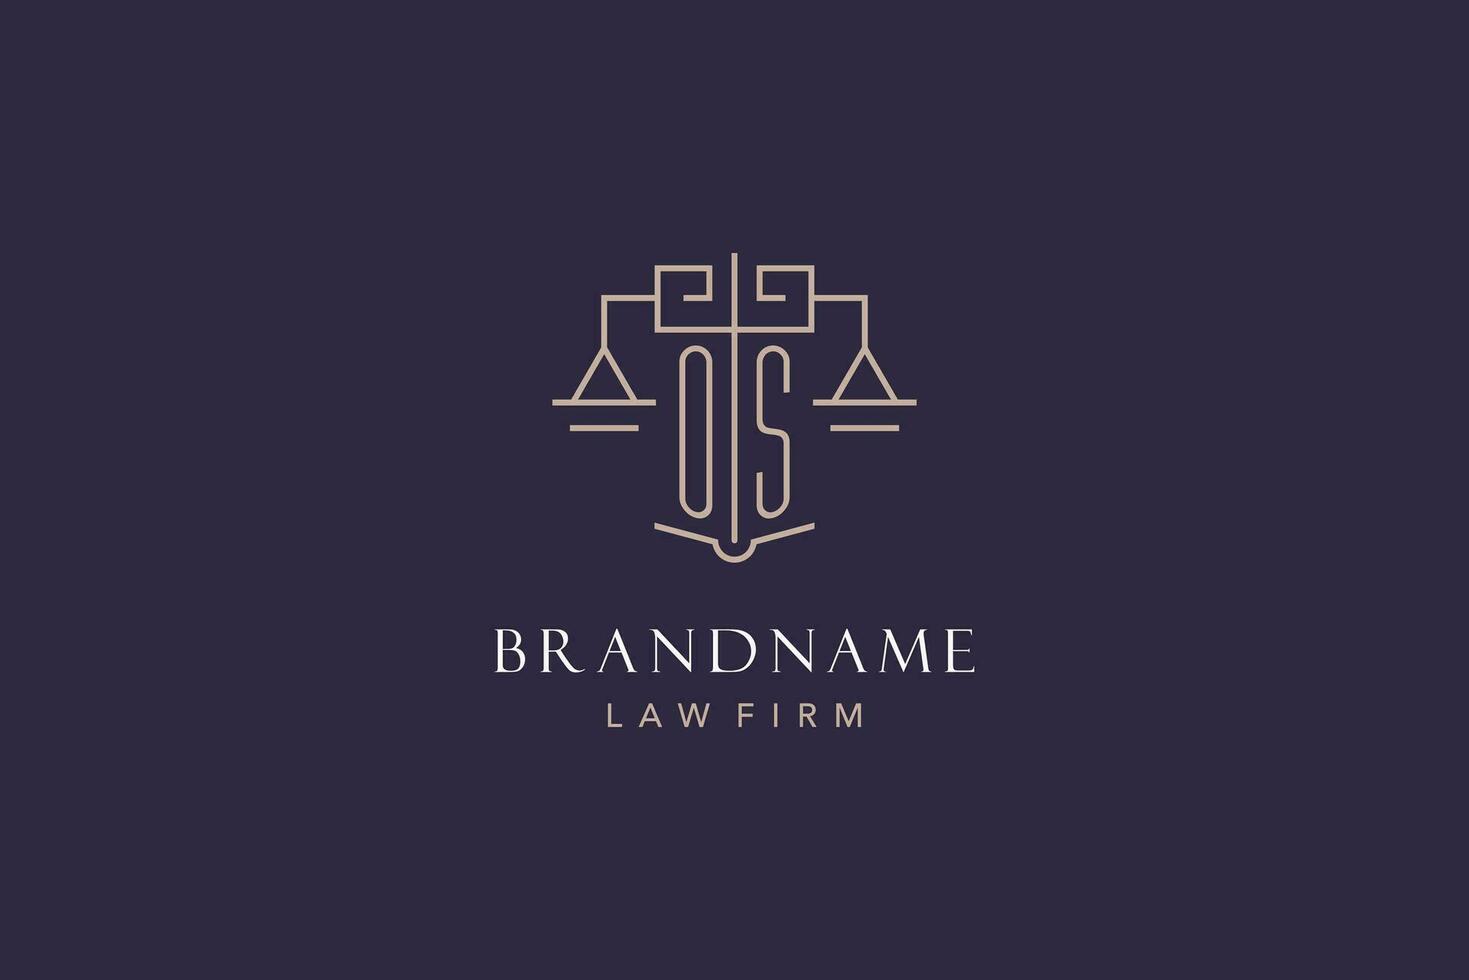 Initial letter OS logo with scale of justice logo design, luxury legal logo geometric style vector